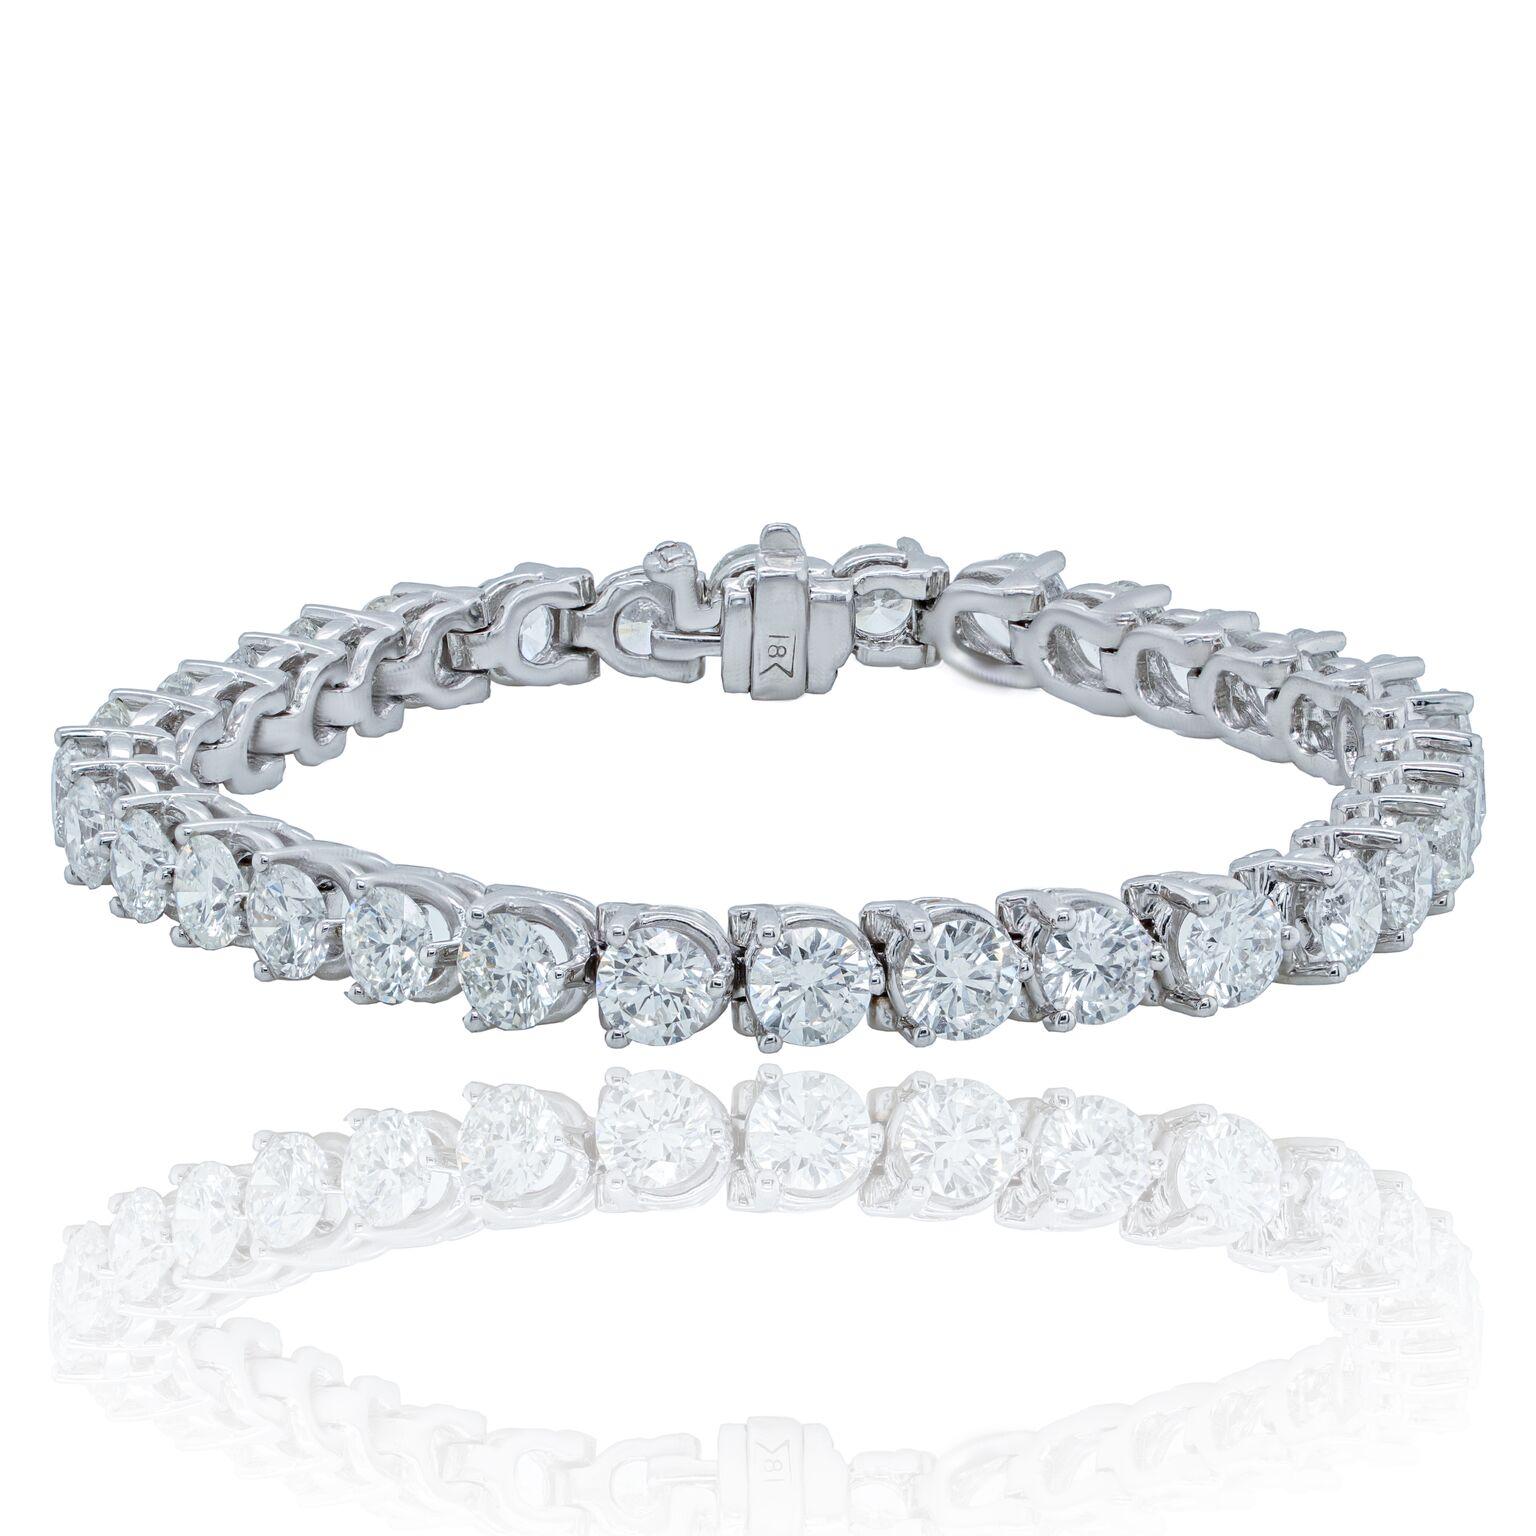 Custom 18kt white gold tennis bracelet with 7.85 cts of round diamonds in a 3 prong setting  36 stones 0.22 each ston GH color SI clarity.  Excellent Cut.
